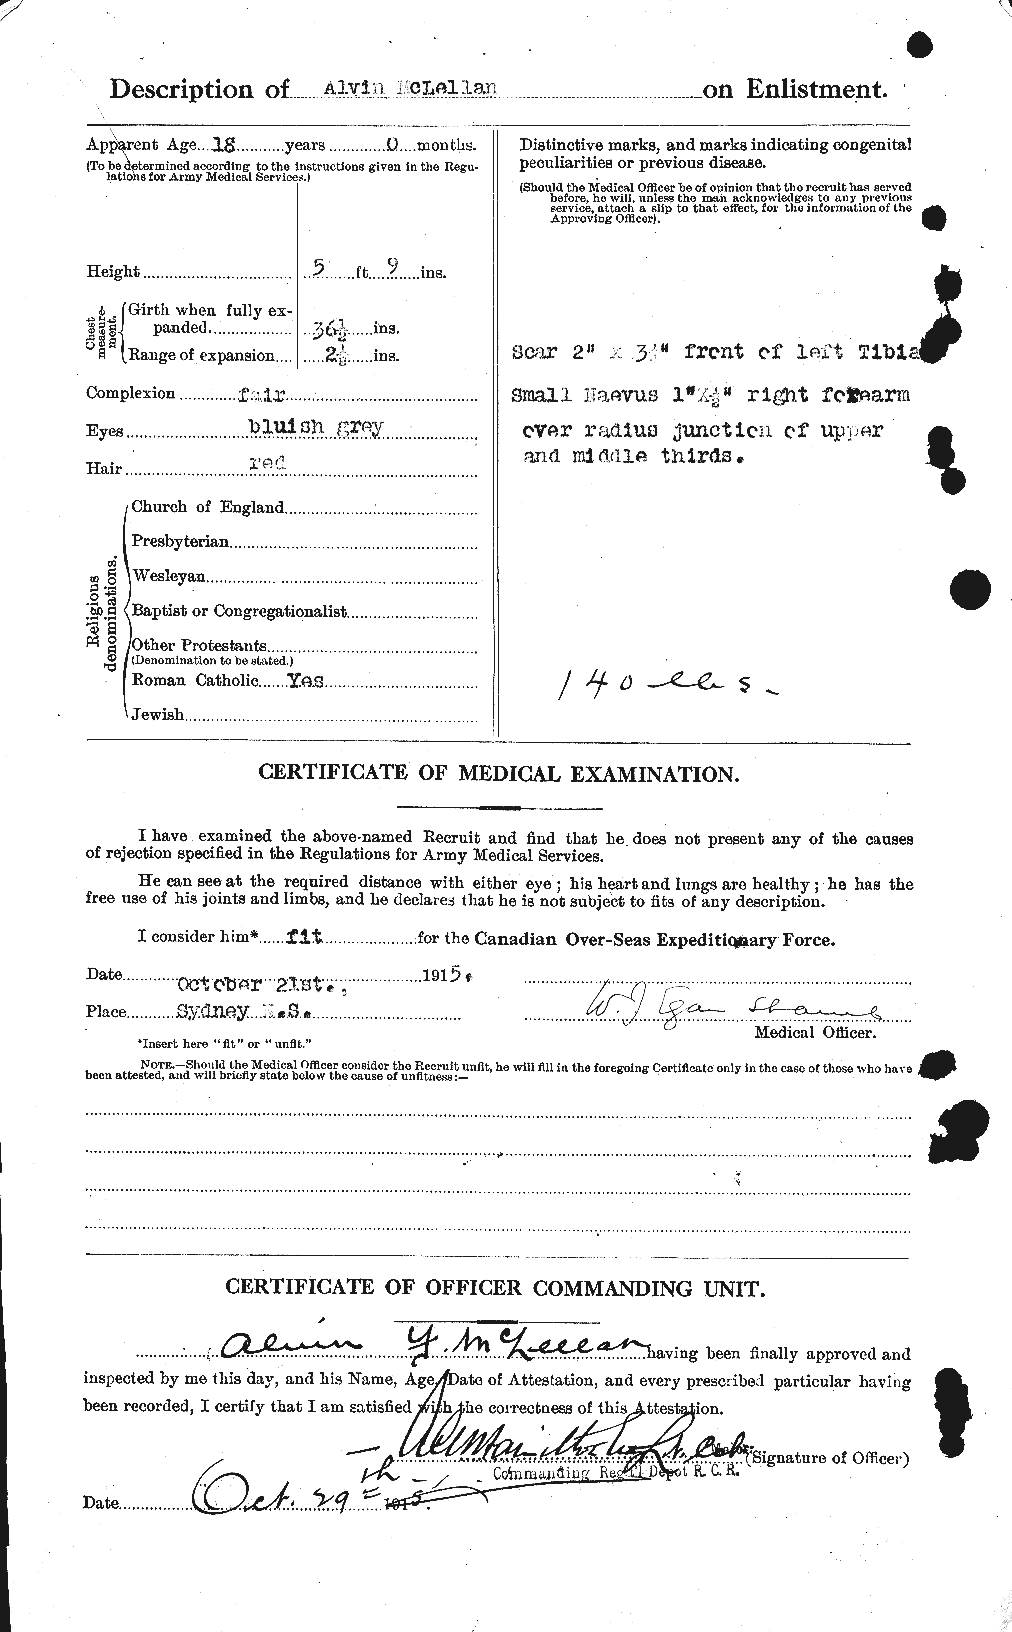 Personnel Records of the First World War - CEF 535385b